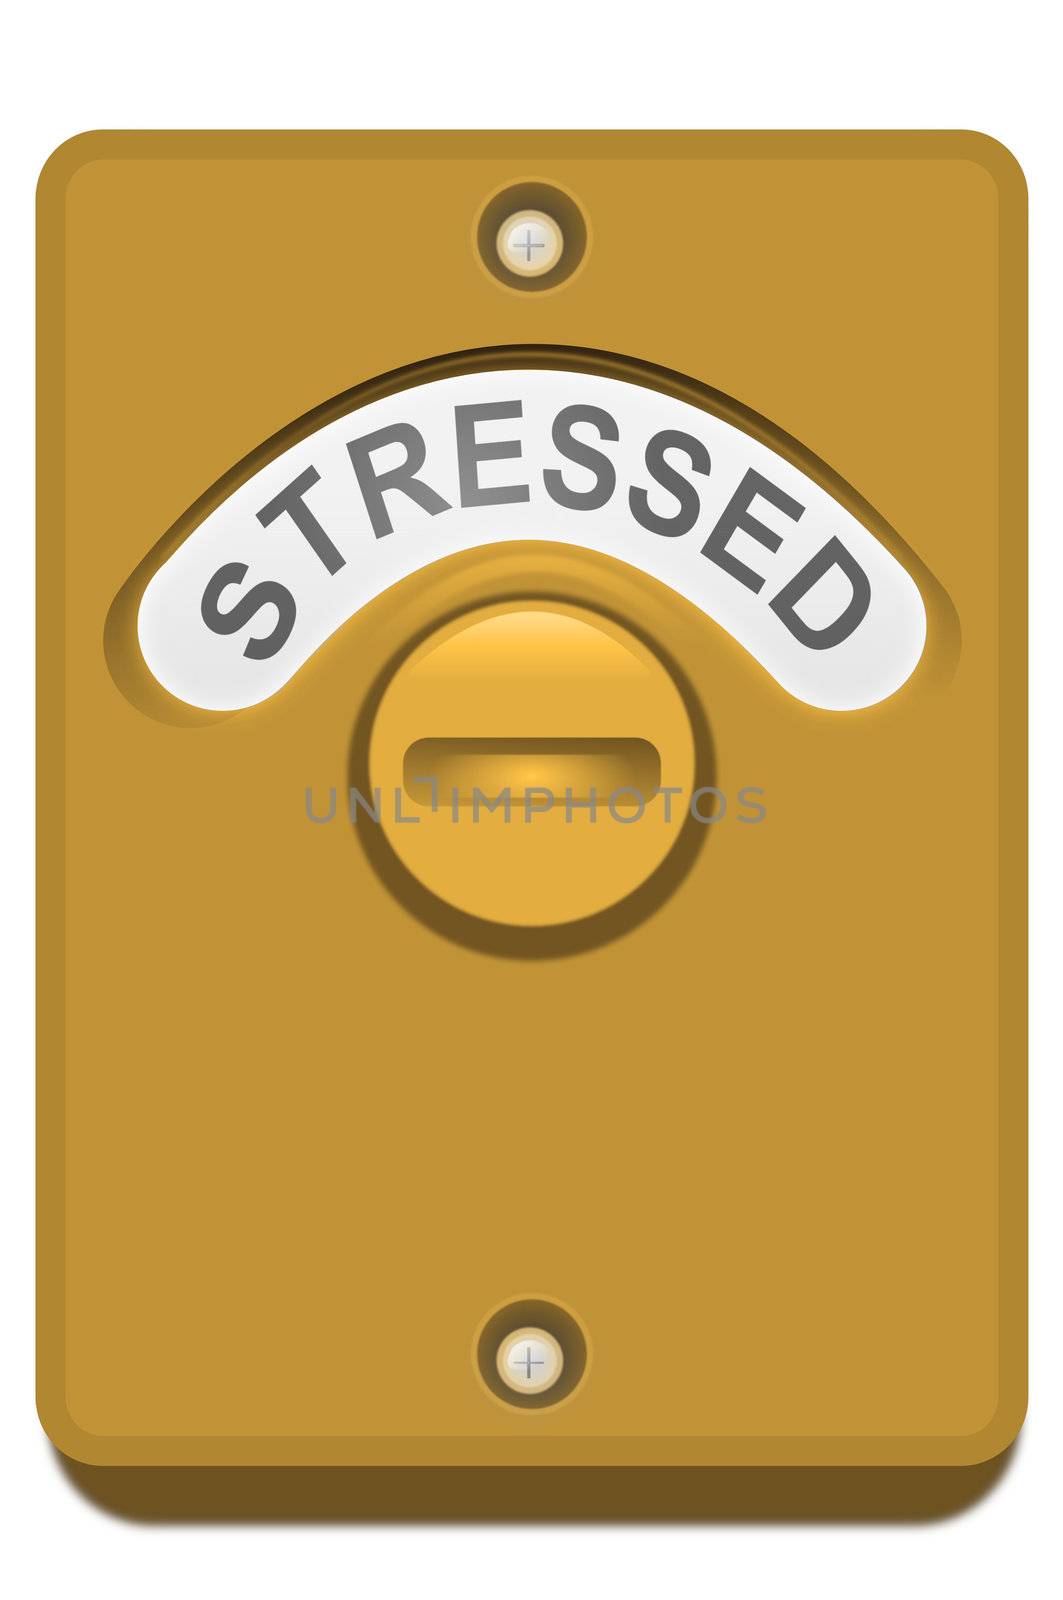 Illustration of a toilet door turning lock with the 'stressed' word position showing. White background.